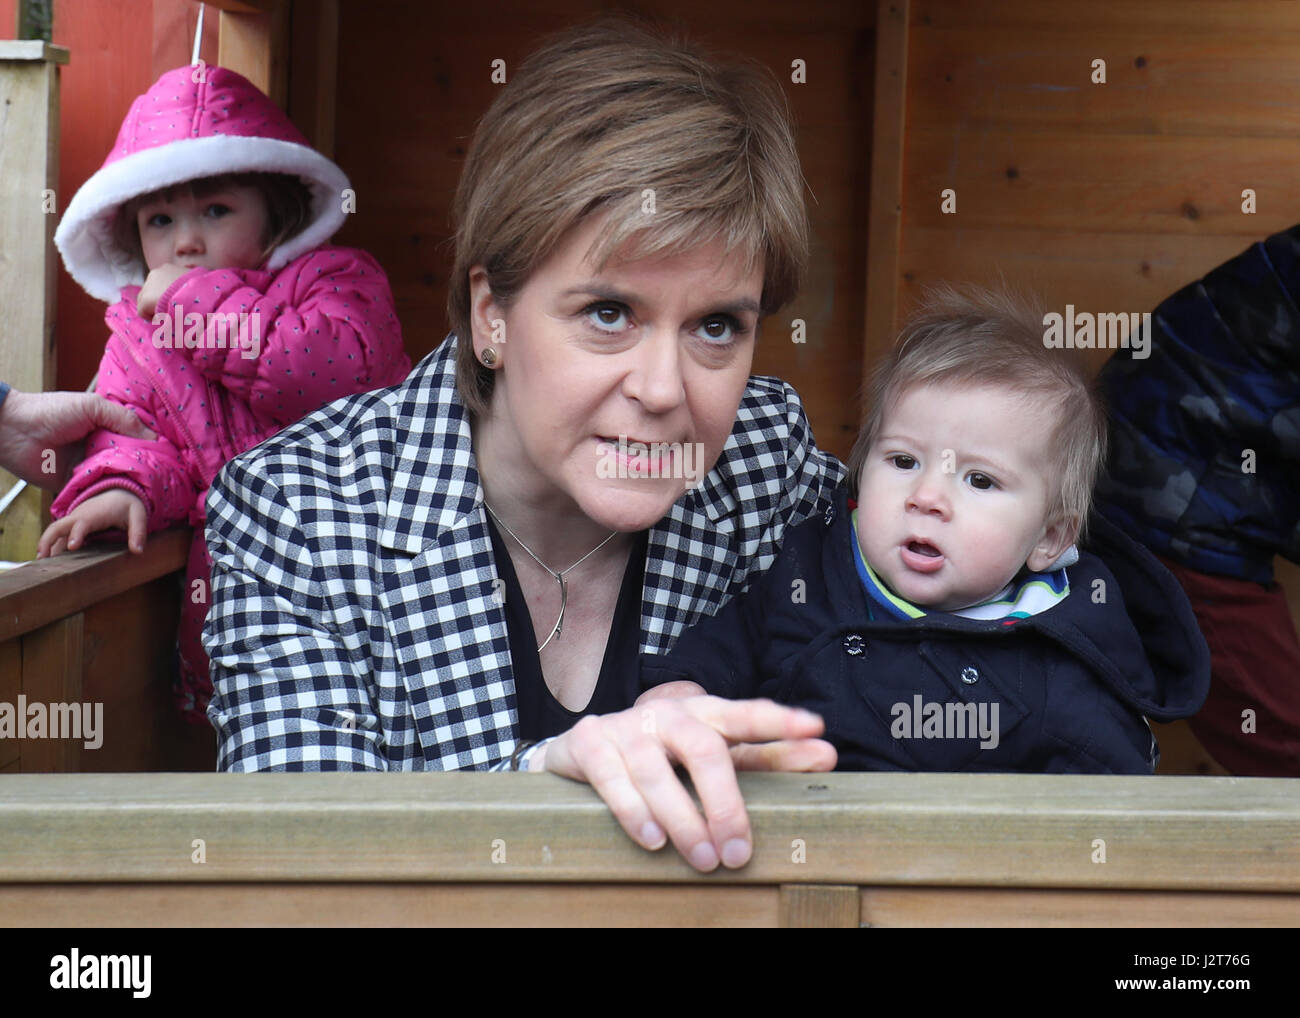 SNP leader Nicola Sturgeon with Alastair Ruddick, 9 months, during a visit to to the Dreams Daycare nursery in Insch, Aberdeenshire, on the election campaign trail. Stock Photo